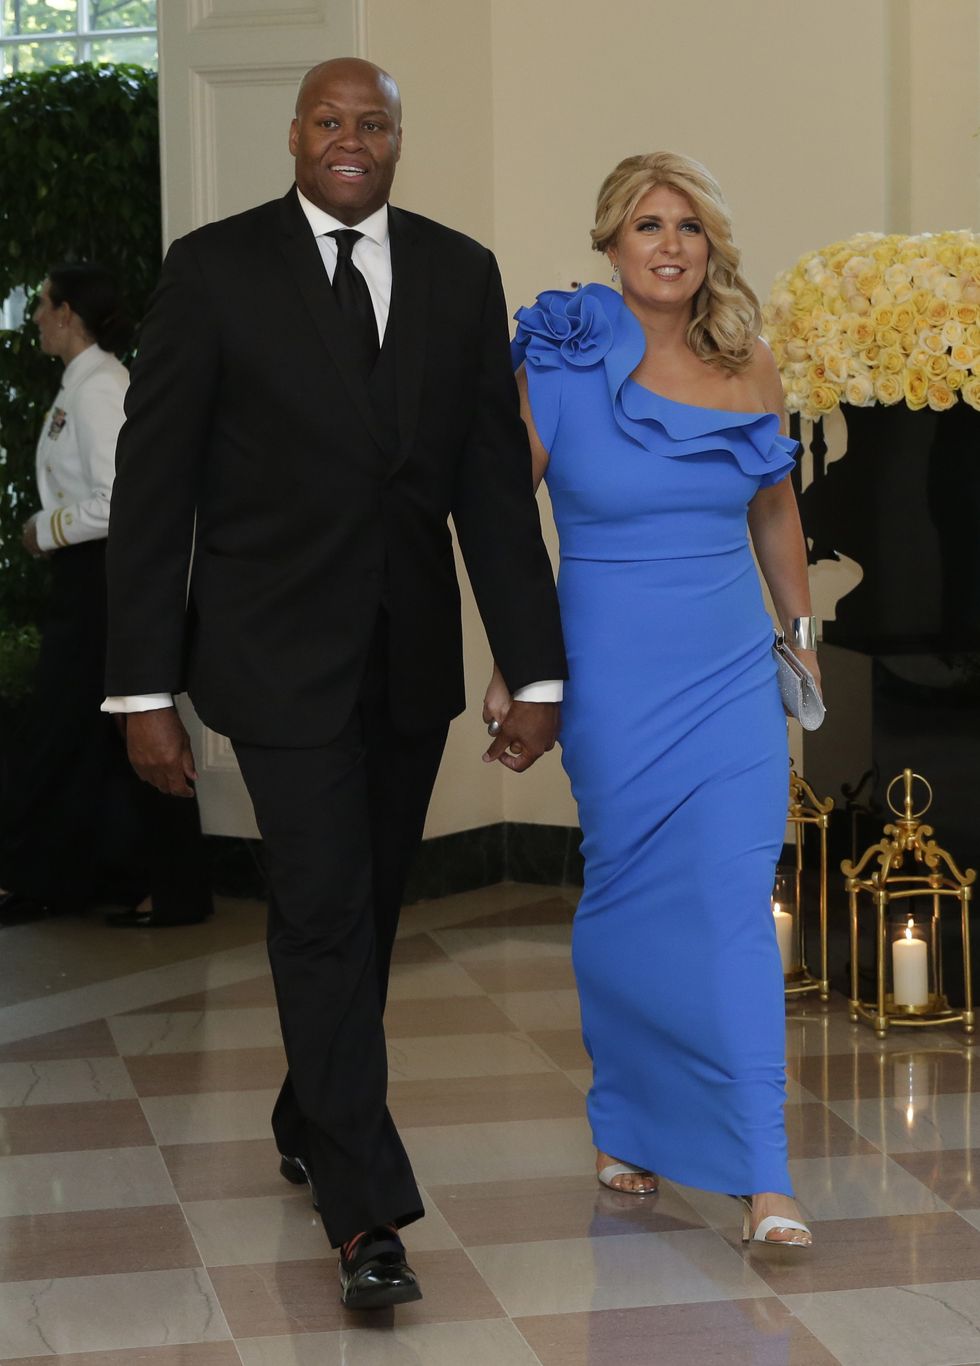 craig robinson and his wife kelly robinson arrive at a state dinner in honor of prime minister lee hsien loong of singapore at the white house in washington on august 2, 2016   afp  yuri gripas        photo credit should read yuri gripasafp via getty images